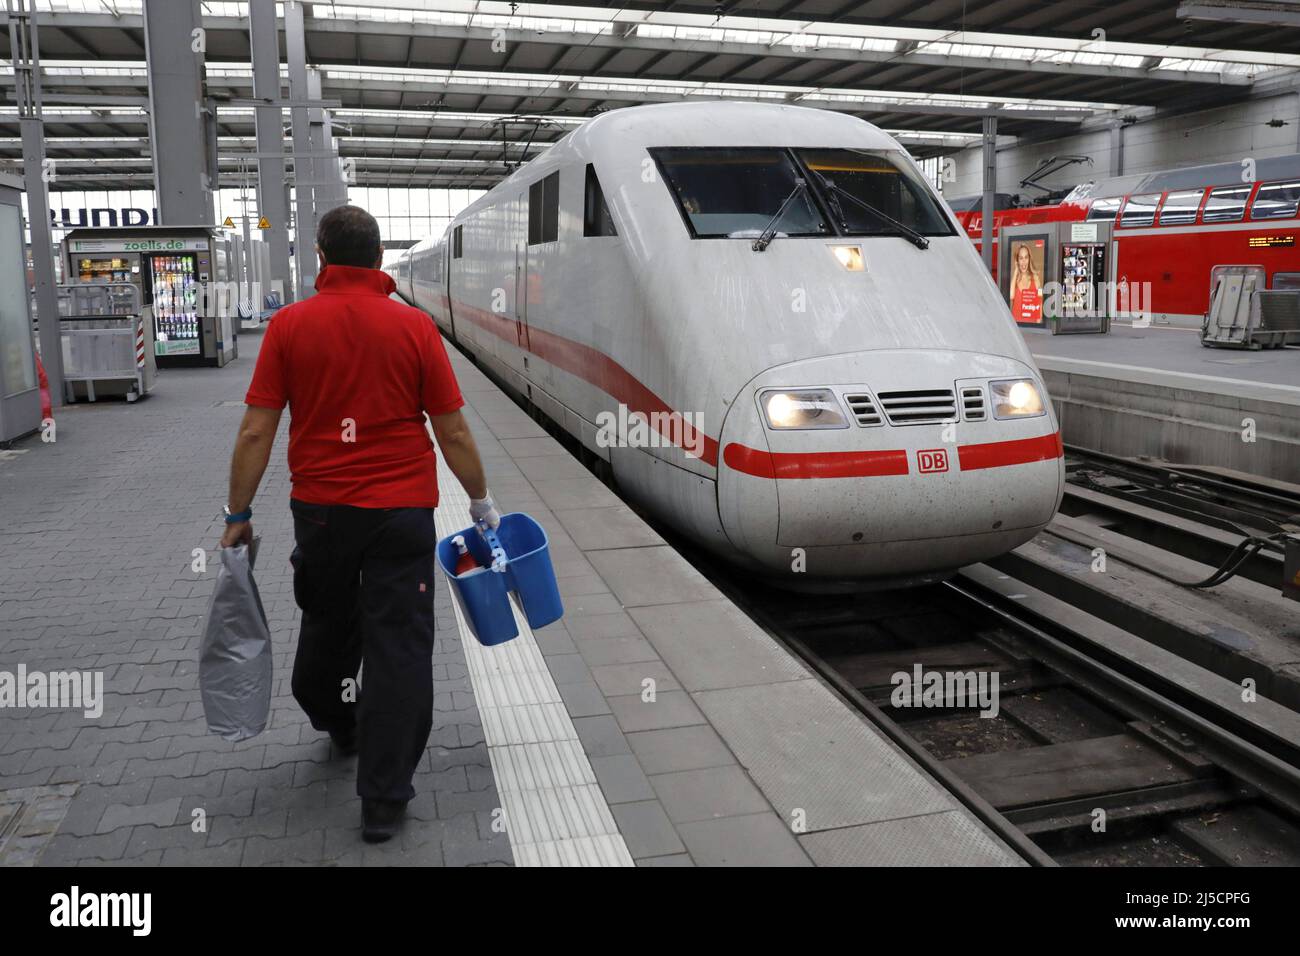 Munich DEU, 16.07.2020 - A service employee of Deutsche Bahn walks to an ICE train at Munich Central Station. Despite the corona crisis, Deutsche Bahn is counting on rising passenger numbers - and investing in 30 new ICE trains. [automated translation] Stock Photo